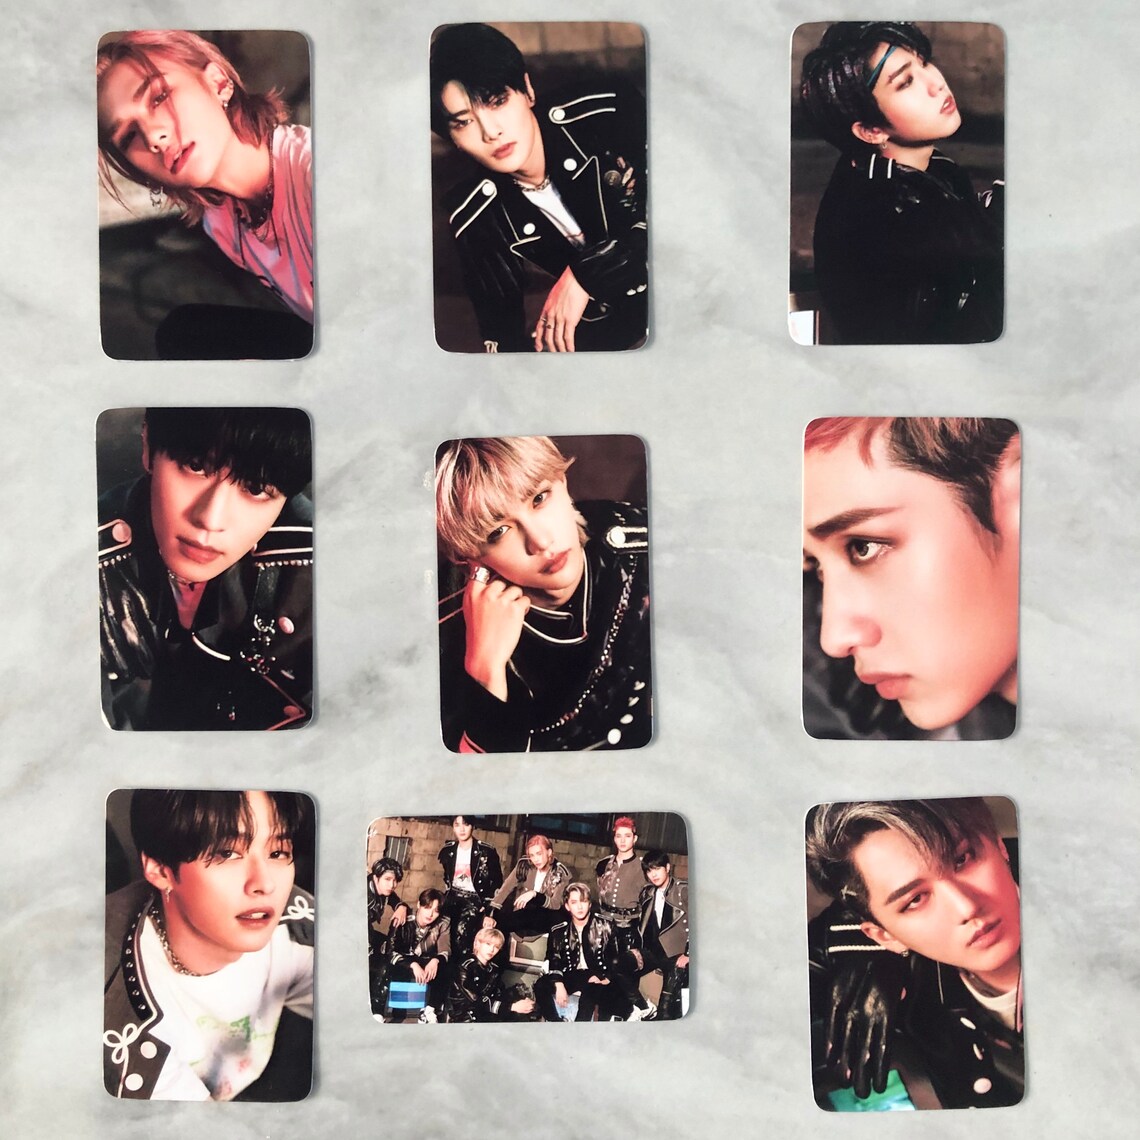 Stray Kids IN 生 LIVE Photocards Laminated | Etsy